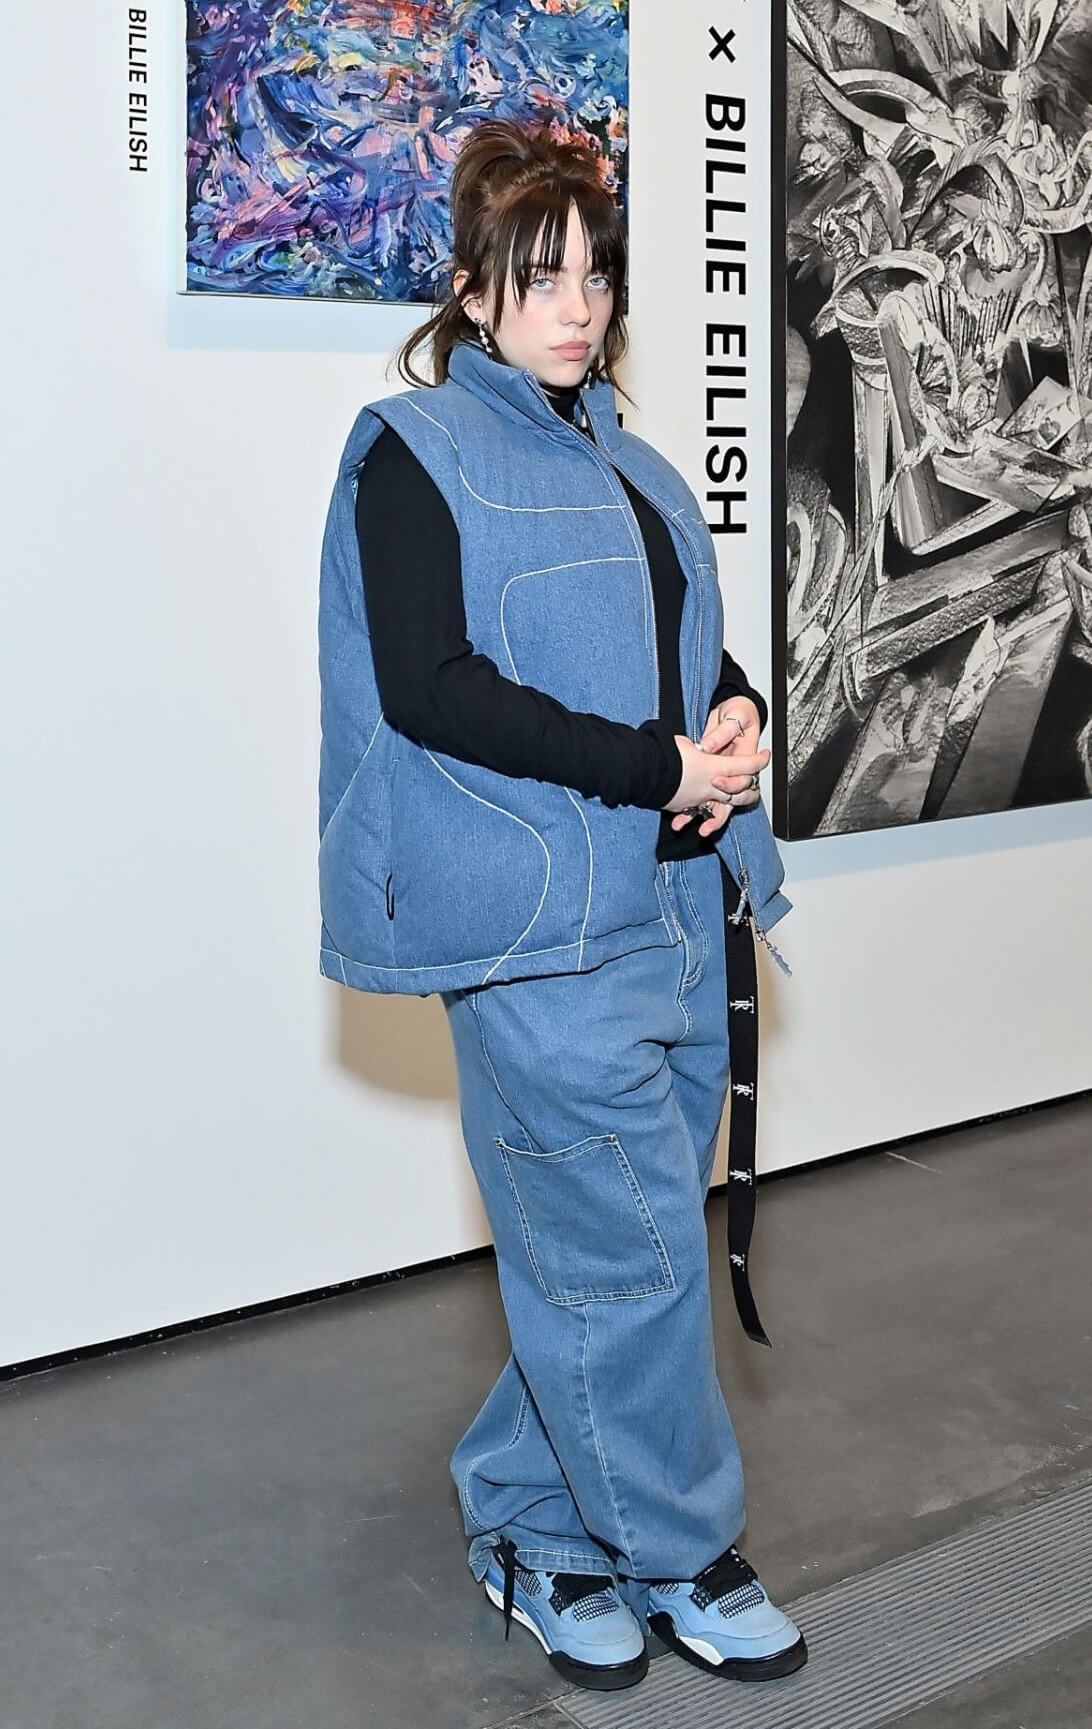 Billie Eilish In Blue Denim Baggy Jacket With Pants At “Artists Inspired by Music: Interscope Reimagined” Art Exhibit in LA